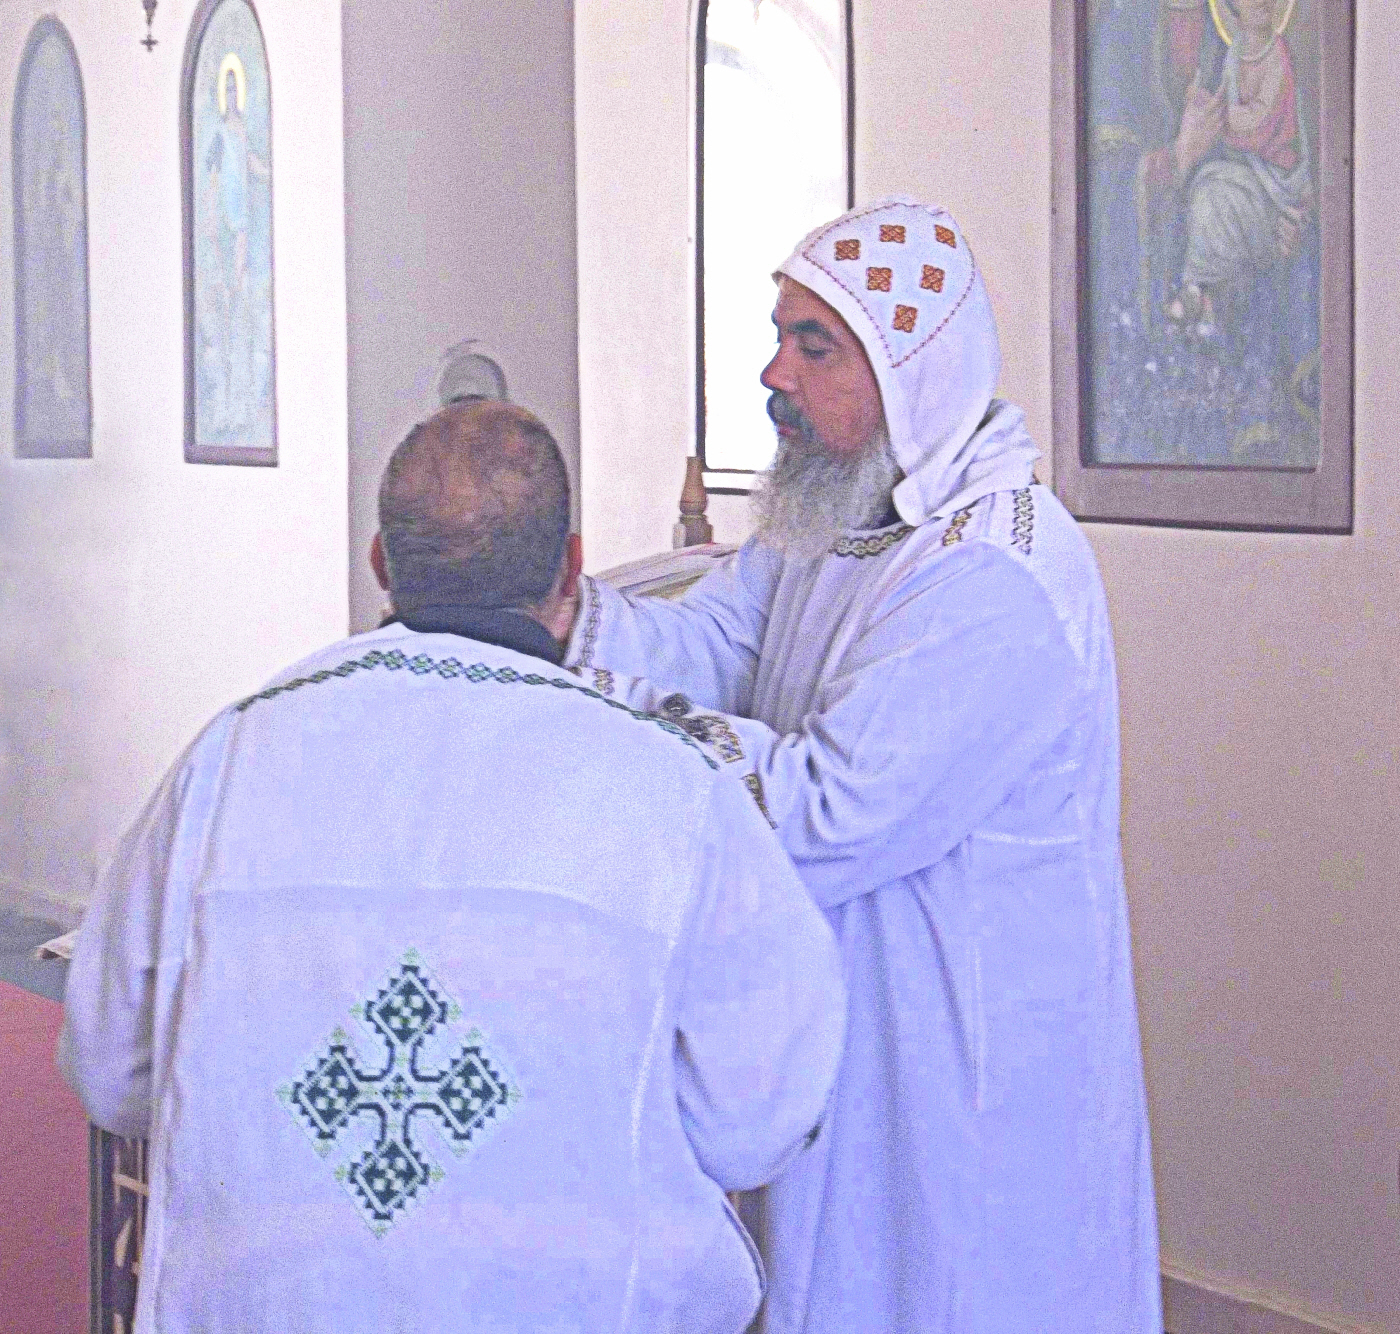 Incense Filled Eucharist (Holy Communion) at St. Paul's Little Church within the Monastery Complex (Egypt)